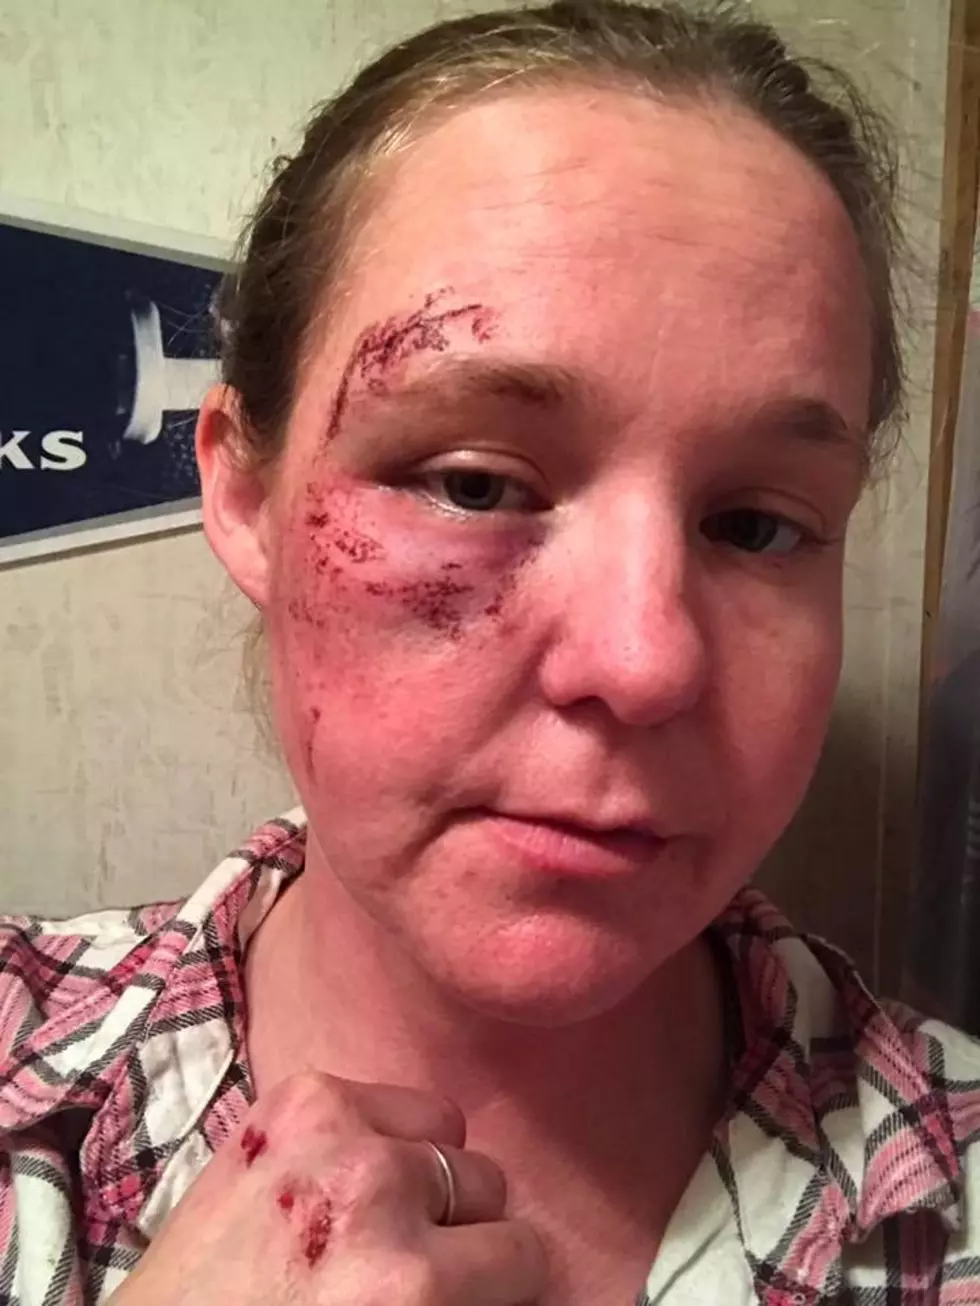 Yakima Woman Fights Off Attacker Asks For Your Help